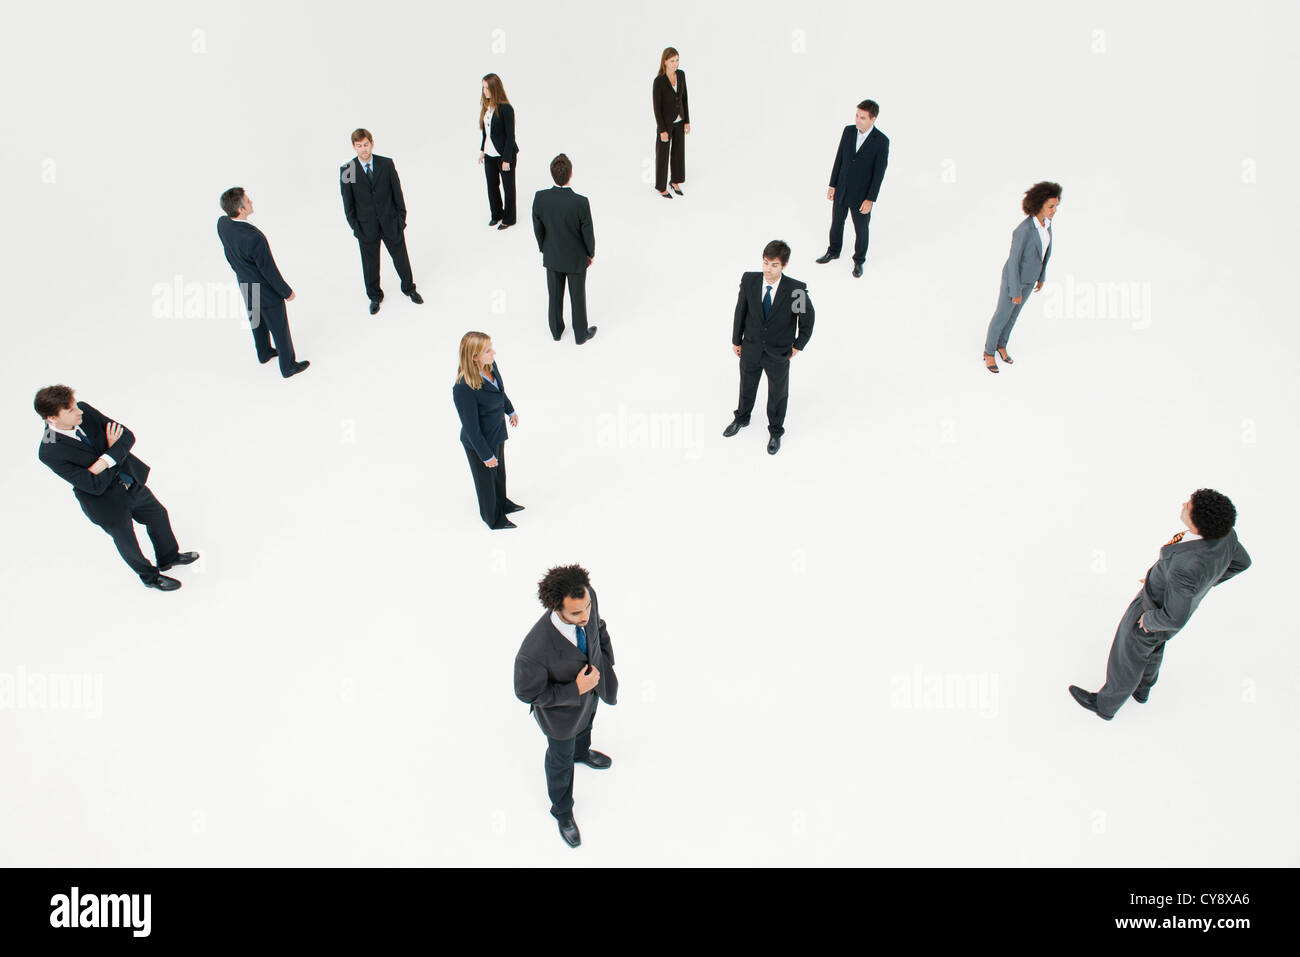 Men and women dressed in business attire Stock Photo